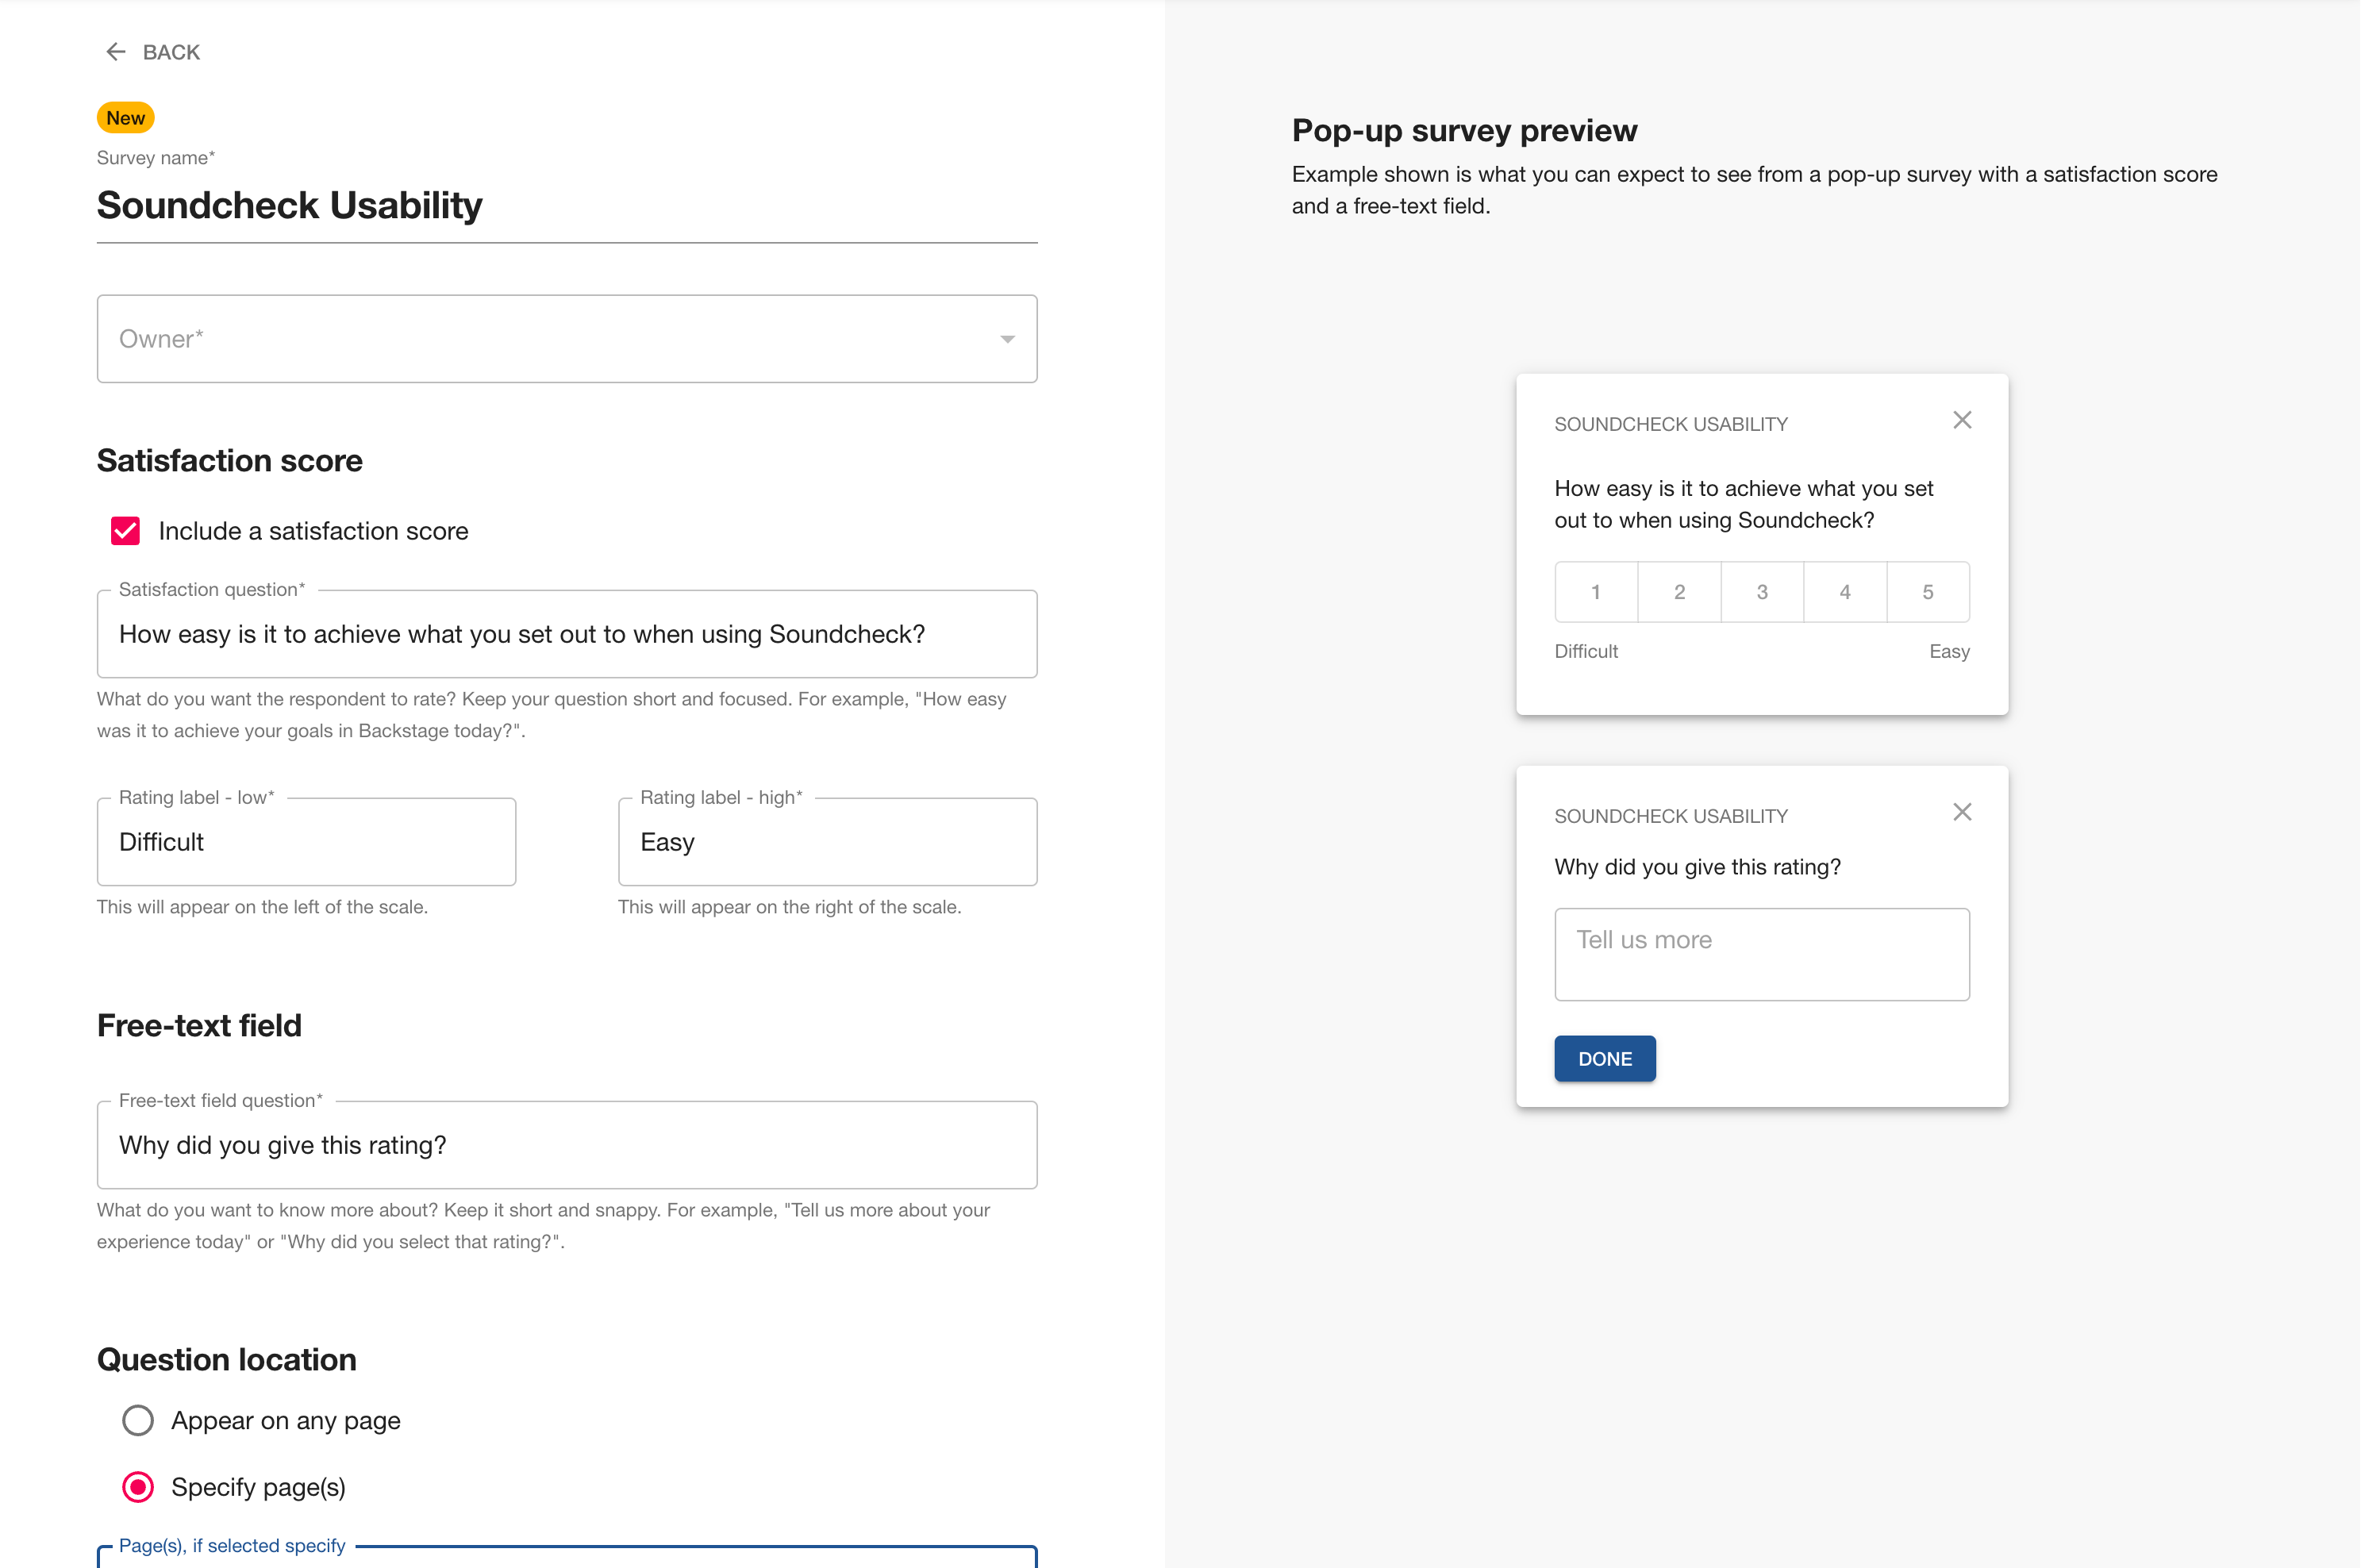 Left half shows a form which would allow you to create pop-up surveys in your Backstage instance, right half shows a preview of said survey